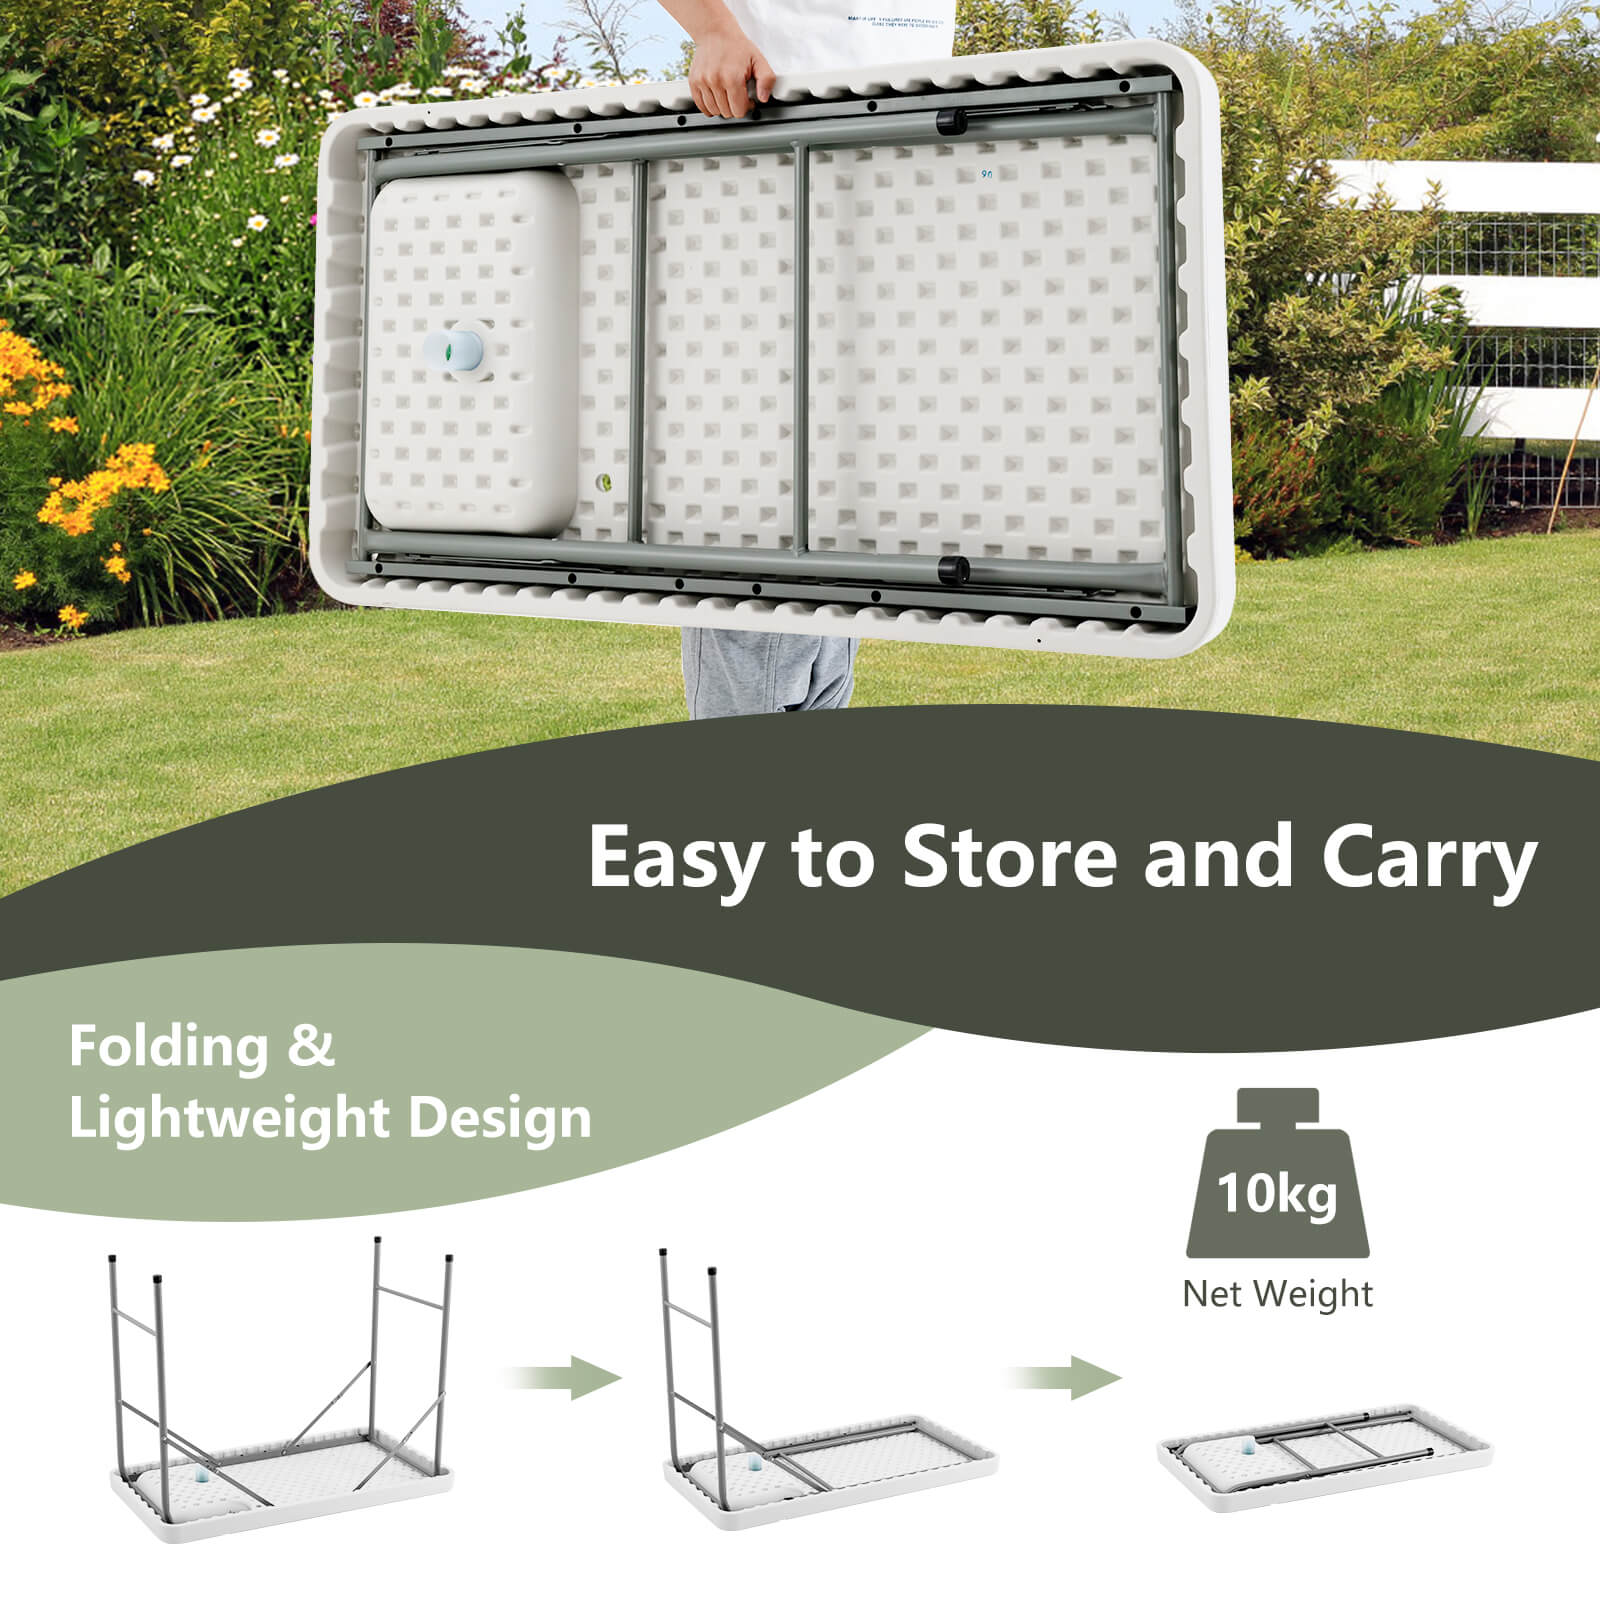 Portable_Folding_Camping_Table_with_Sink_and_Rotatable_Faucet_for_Fish_Cleaning-9.jpg